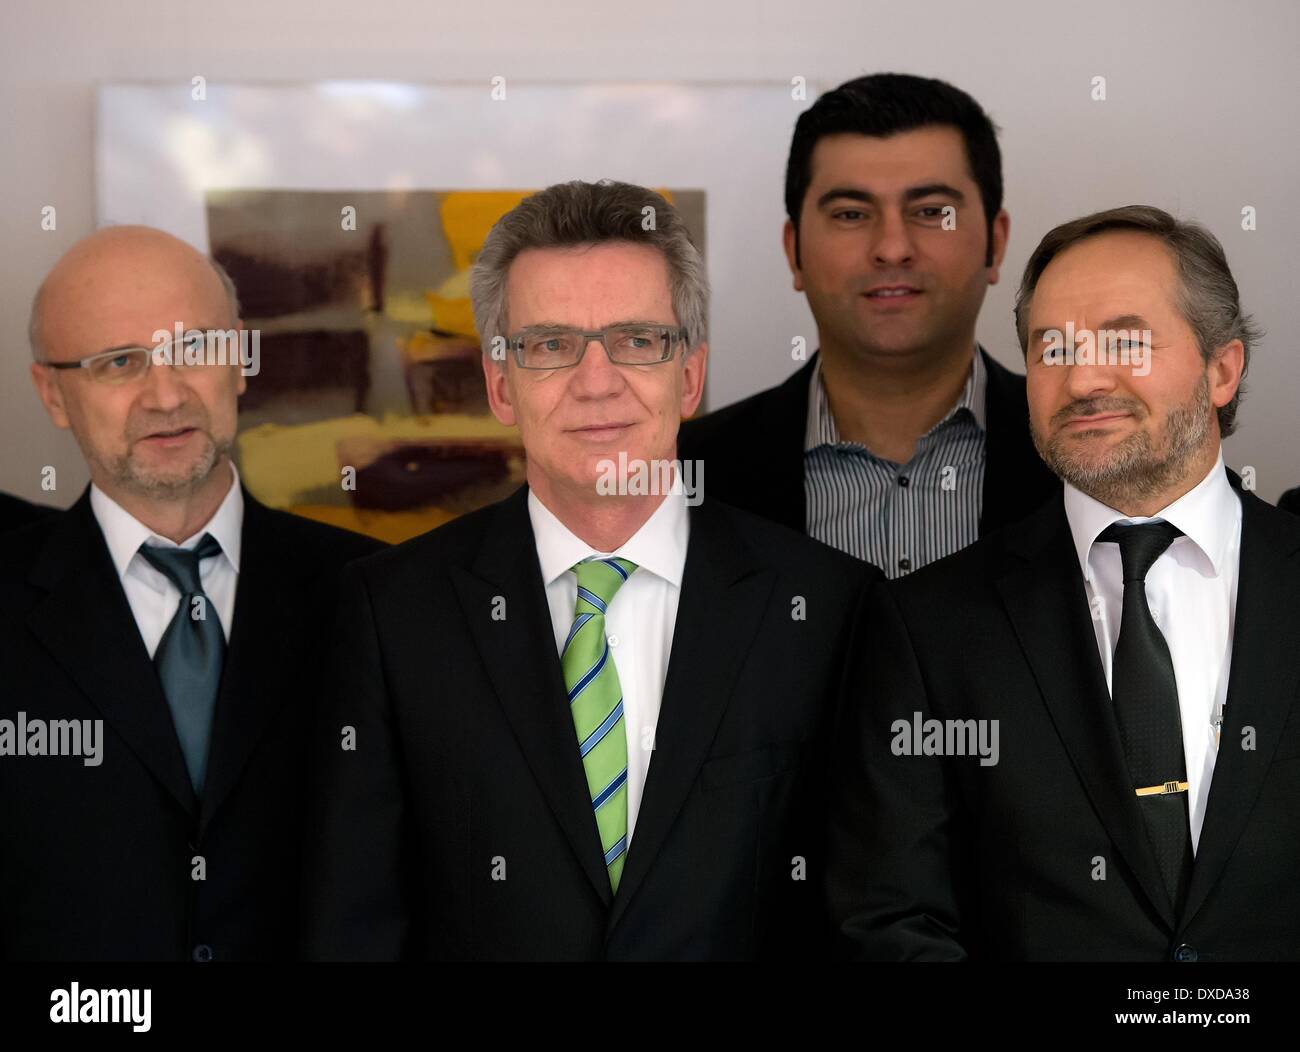 German Minister of the Interior Thomas de Maiziere (CDU, 2-L) poses with representative of the Islamic Community of Bosniaks in Germany, Bernes Alihodzic (L), Yilmaz Kahraman (2-R) of the Alevi Community of Germany and chairman of the Turkish-Islamic Institution for Religion, Bekir Alboga (R) before a consultation in Berlib, Germany, 24 March 2014. The German Minister of the Interior and representatives of Islamic organisations intend to discuss the new format of the German Islam Conference (DIK), which has existed since 2006. Photo: SOEREN STACHE/DPA Stock Photo